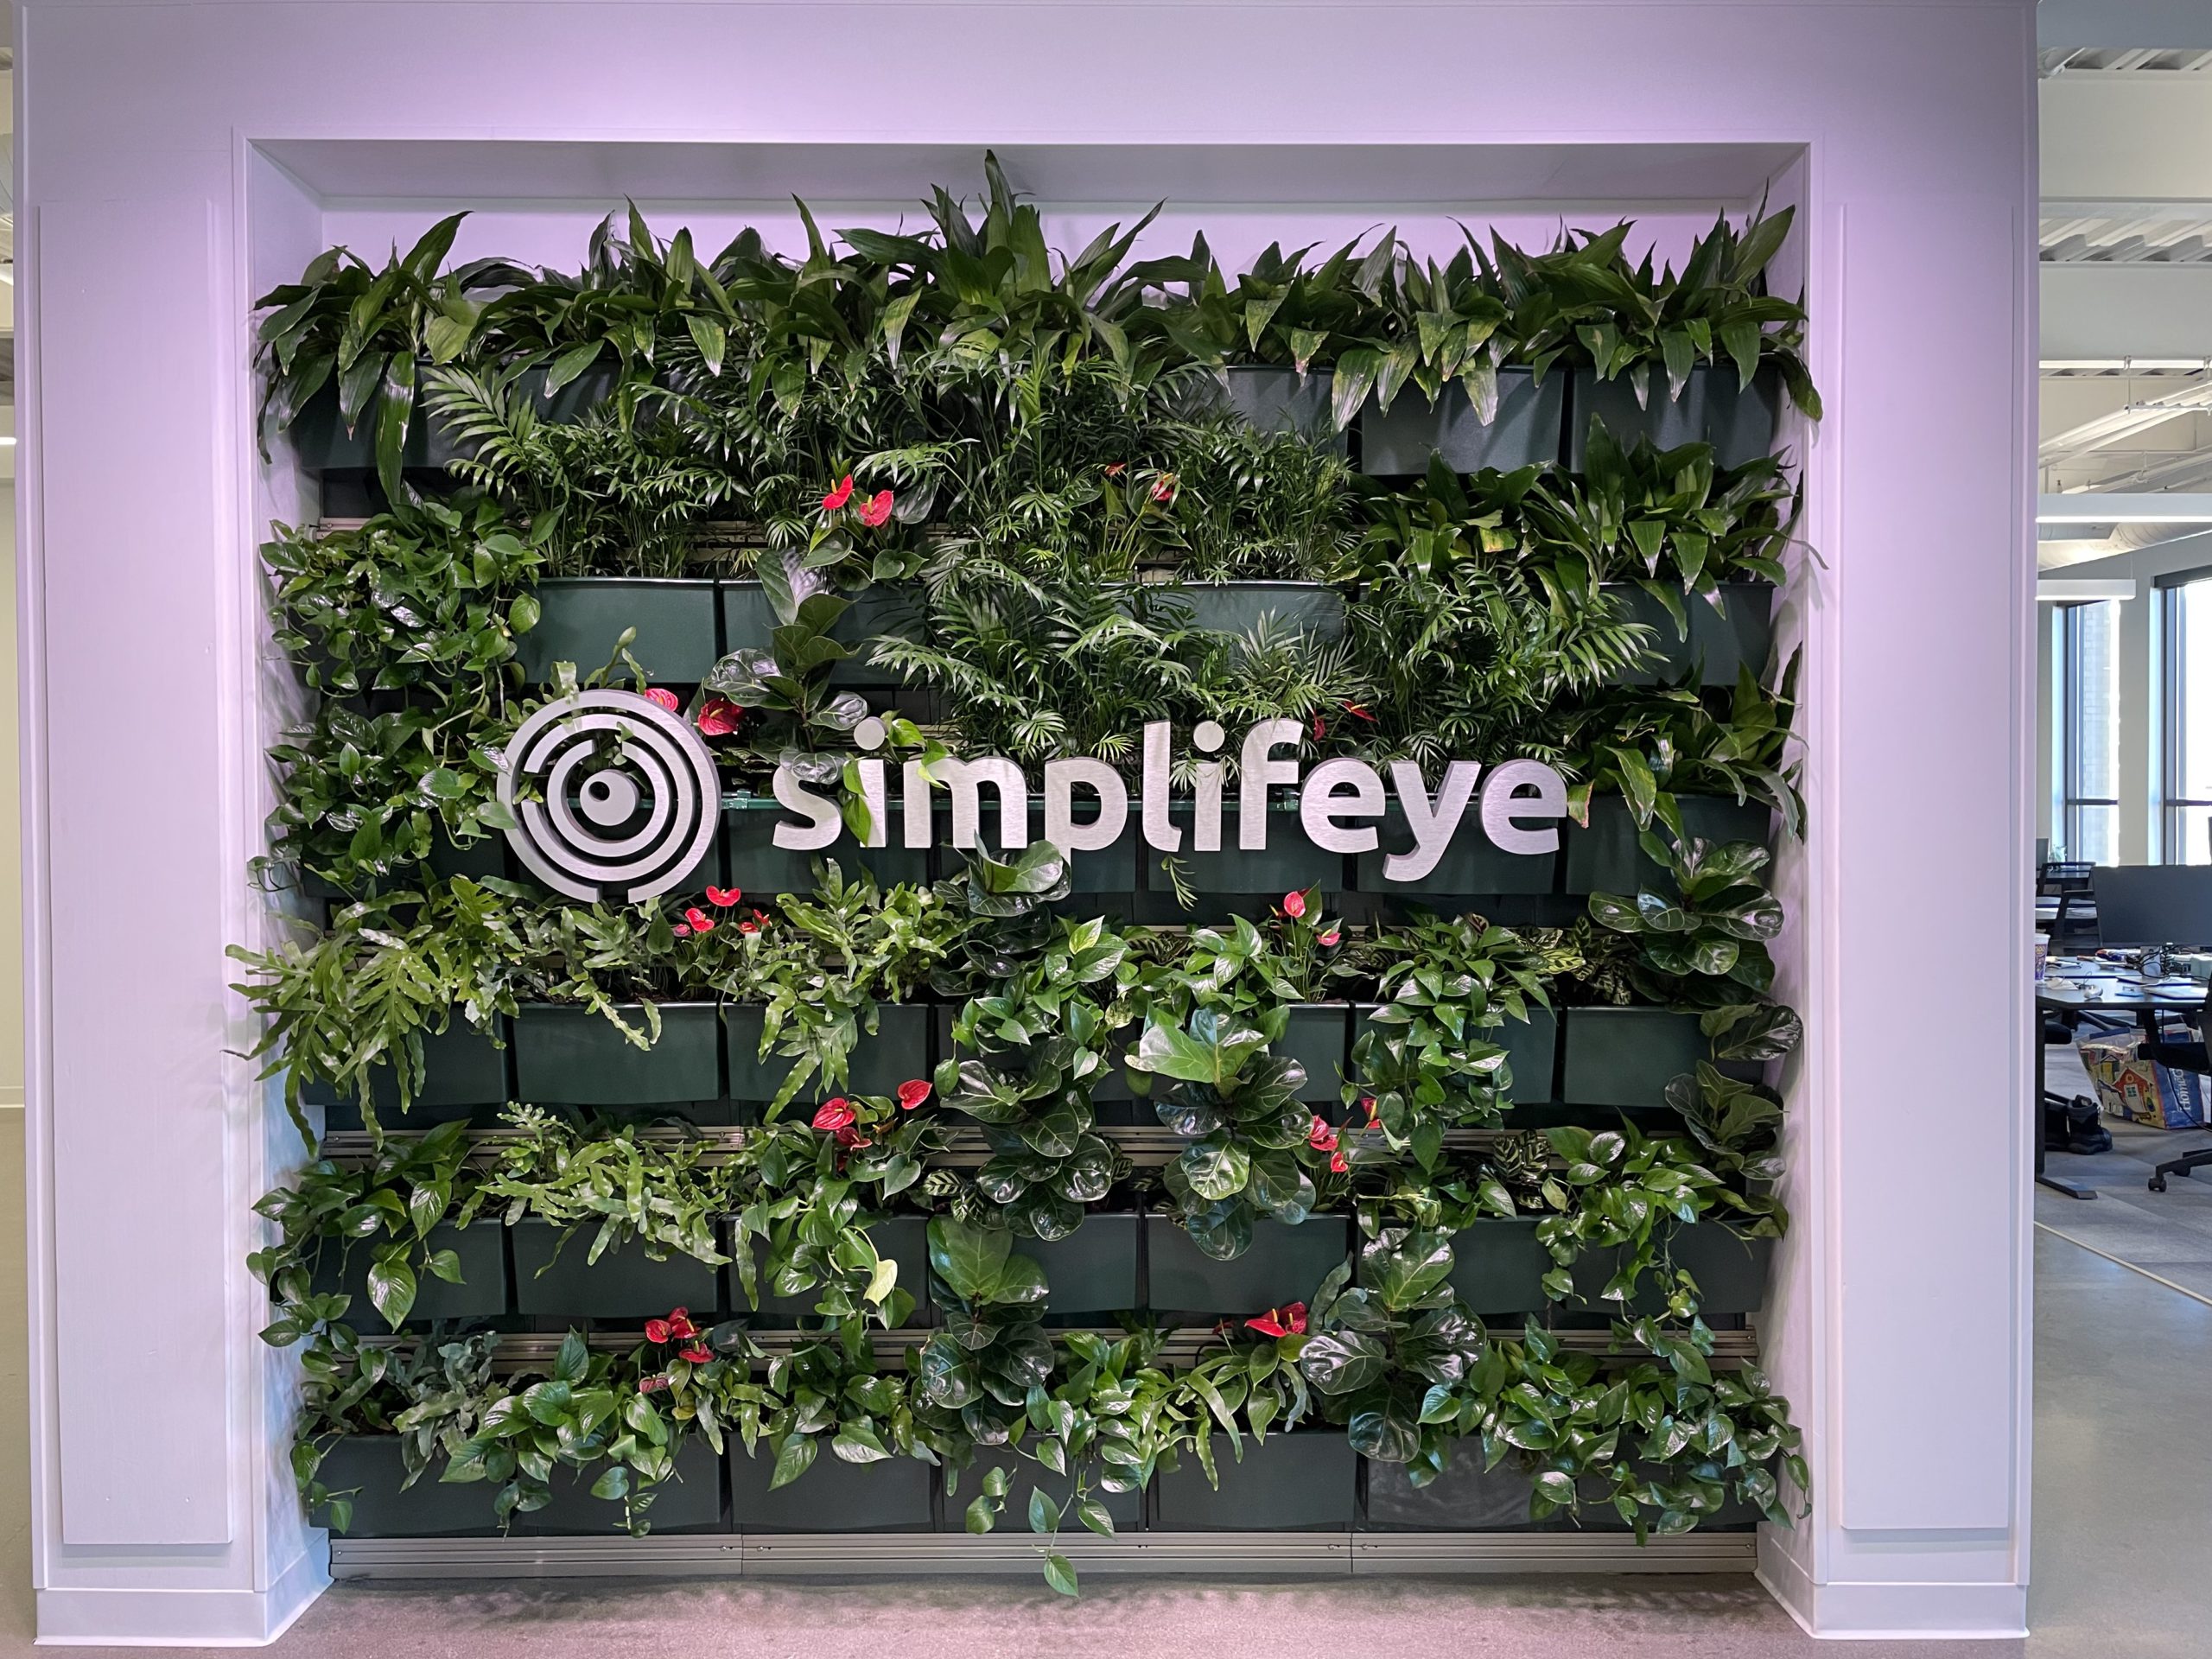 The logo and text of Simplifeye nestled in the center of a lush living wall